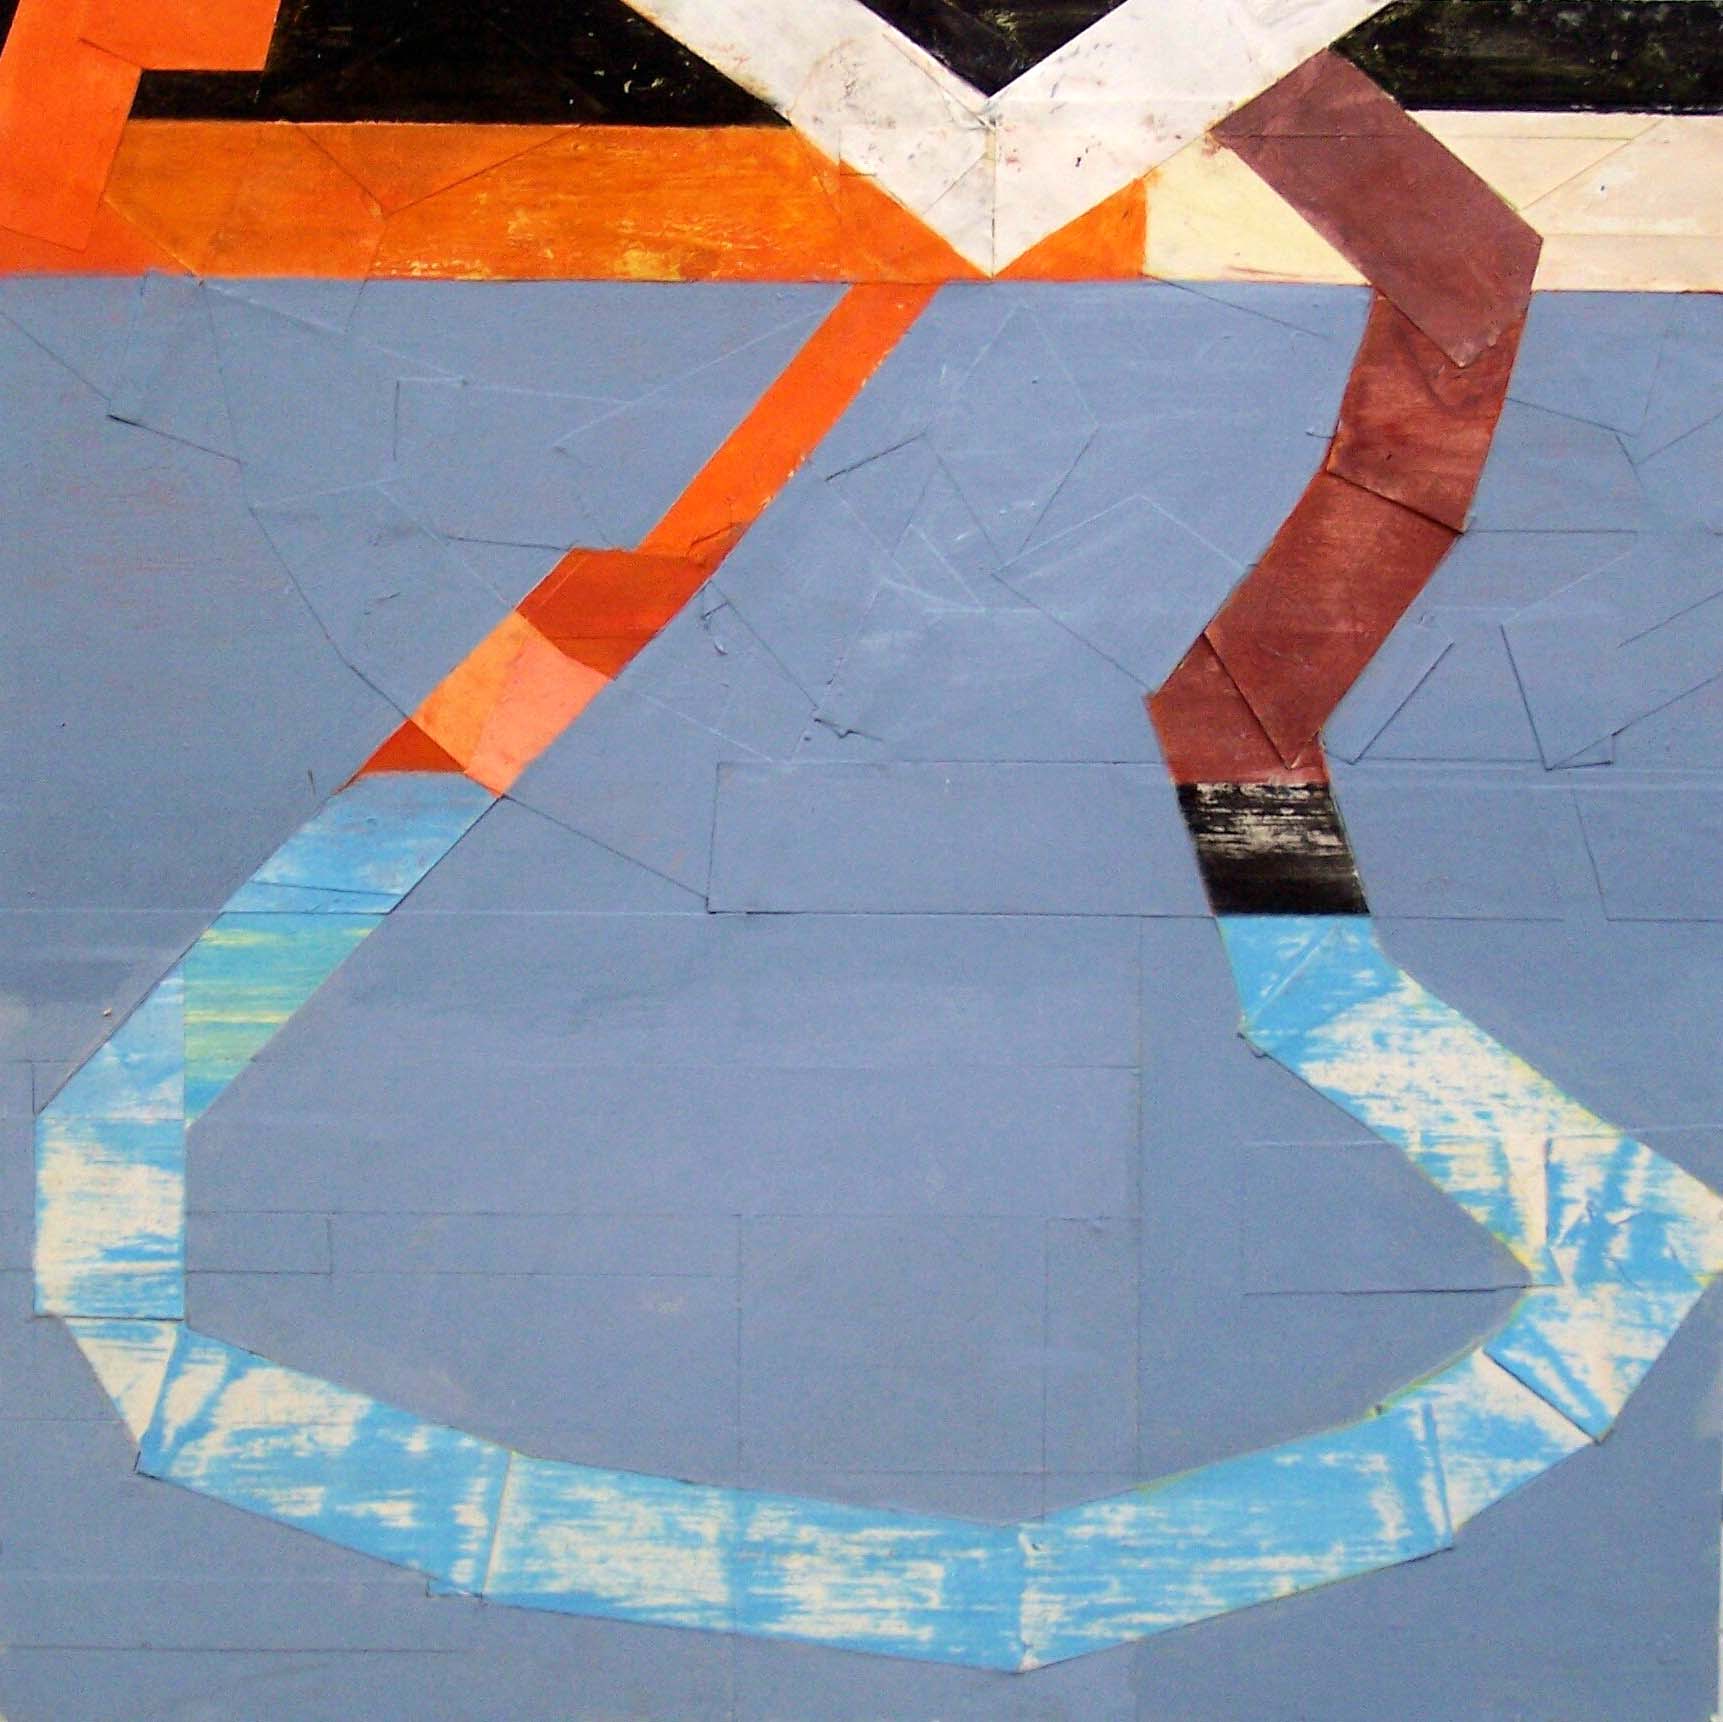 upper-white-chevron-2007-acrylic-and-pasted-paper-on-board-61x61cm.jpg